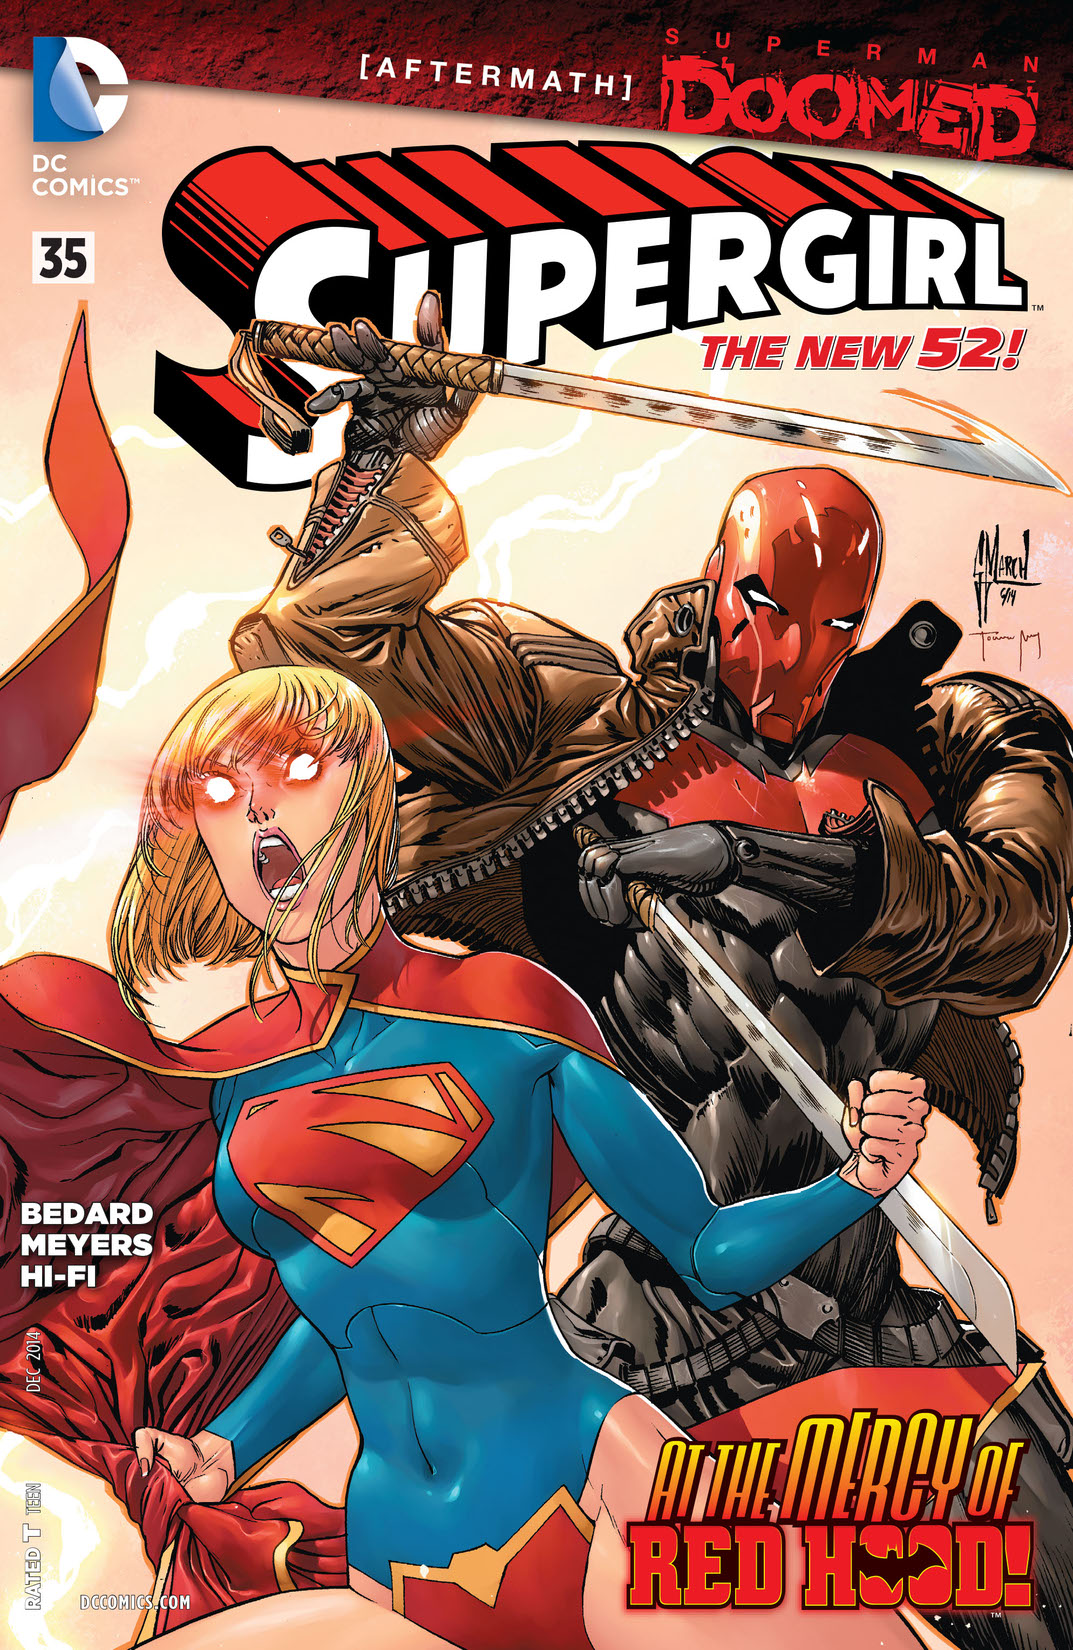 Supergirl (2011-) #35 preview images